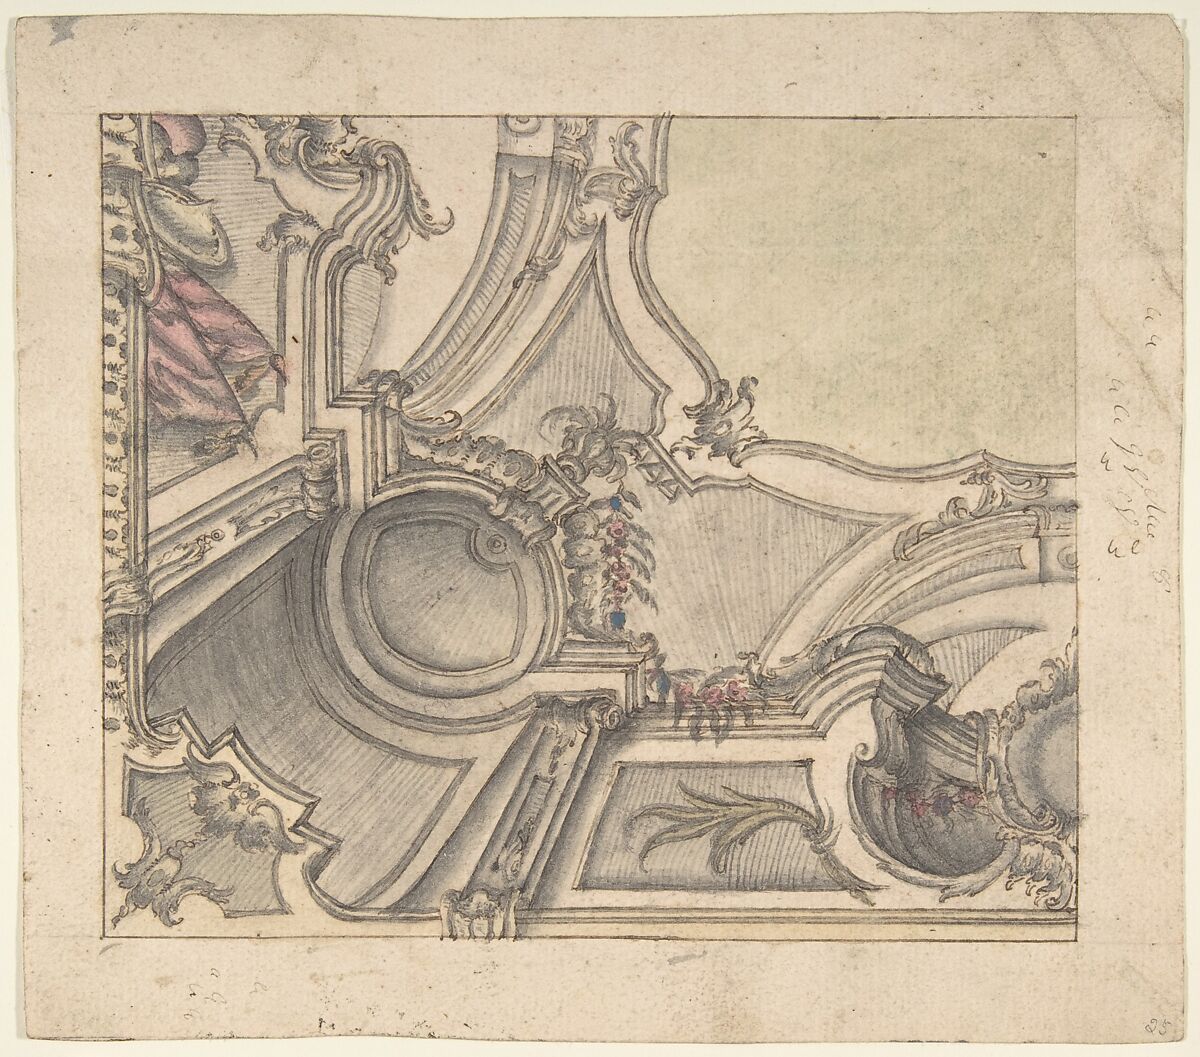 One Quarter of a Design for a Painted Ceiling (recto); Frieze with Putto, Vases, and Other Decorations (verso), Anonymous, Italian, Piedmontese, 18th century, Pen and brown ink, brush and gray wash and watercolor, over leadpoint or graphite, with ruled and compass construction; framing lines in pen and brown ink (recto); pen and brown ink over leadpoint or graphite with ruled construction (verso) 